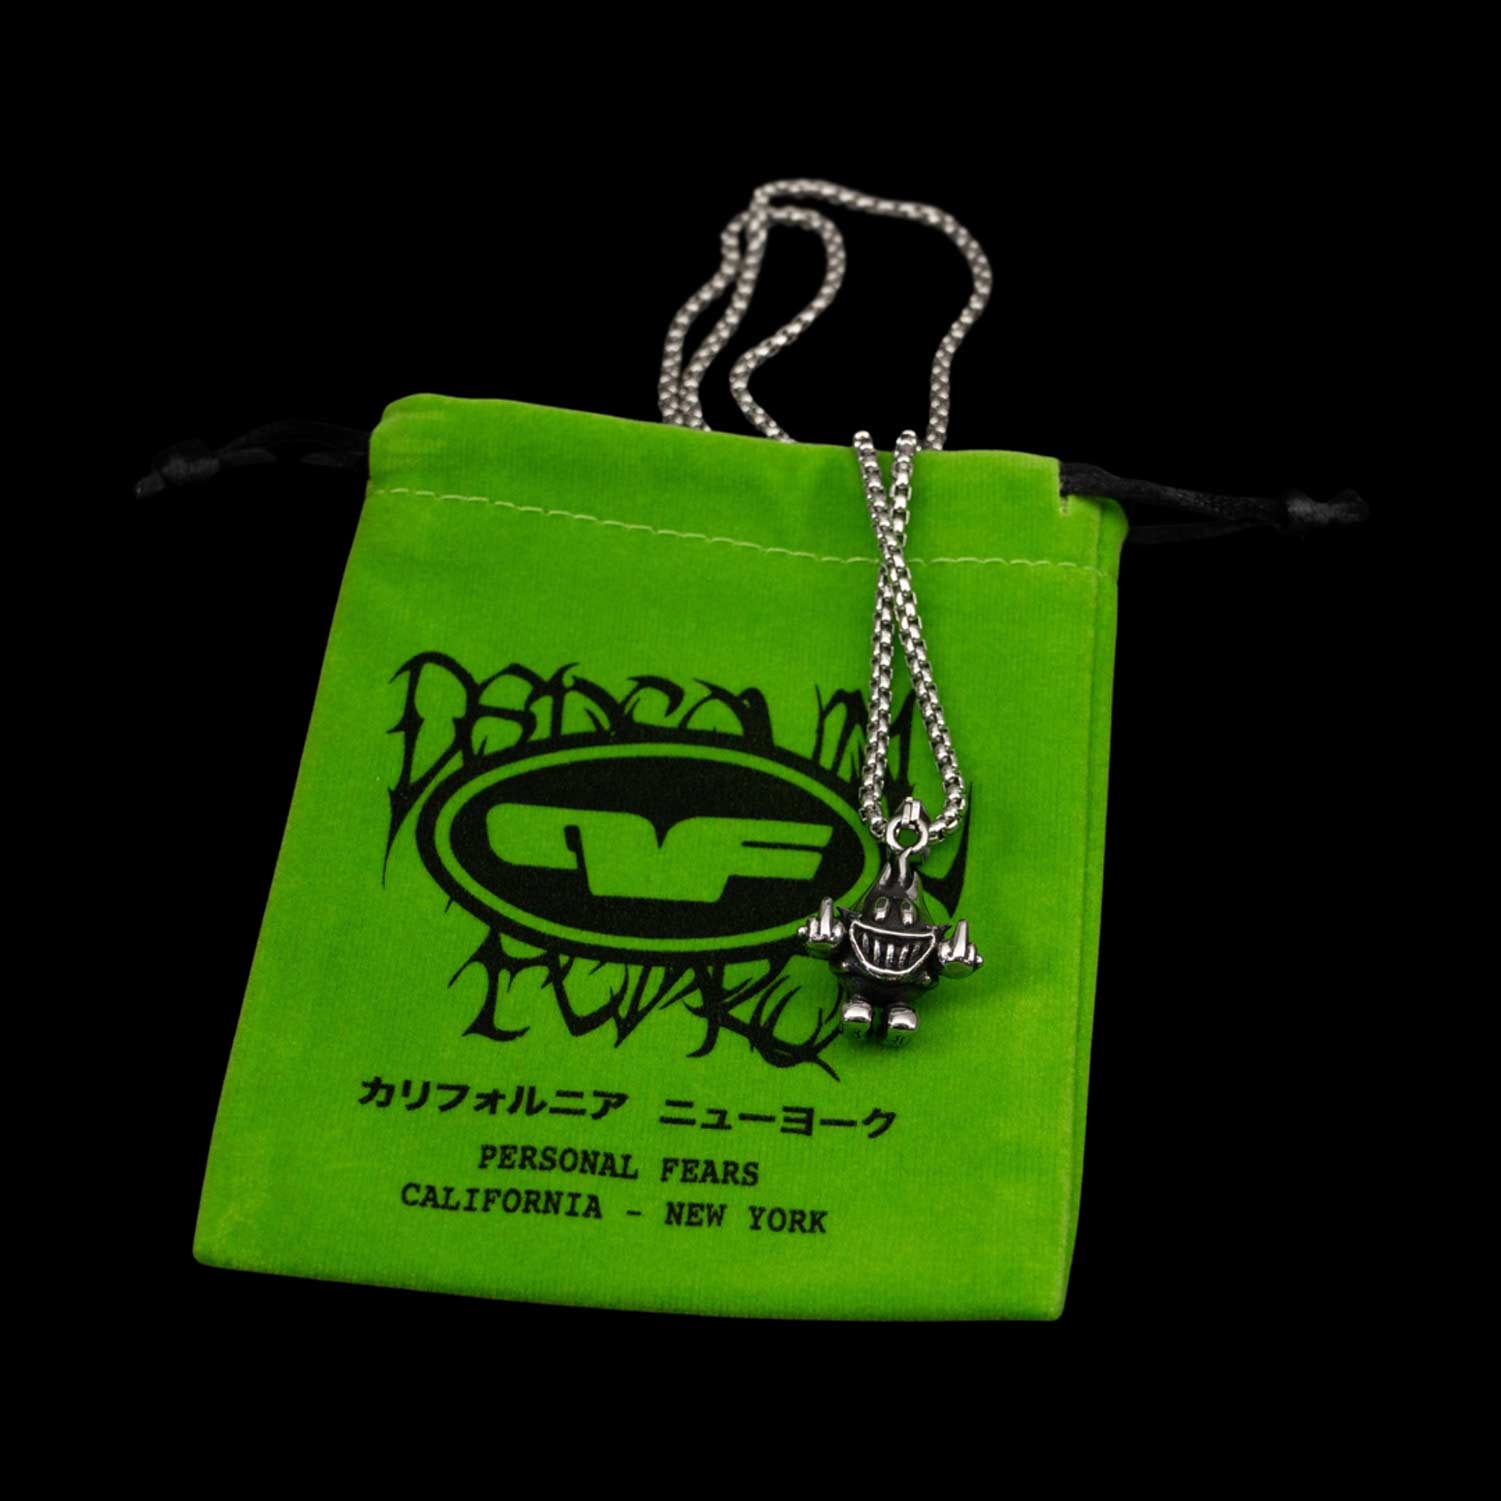 Lame Boy Pendant by Personal Fears with Green carrying bag